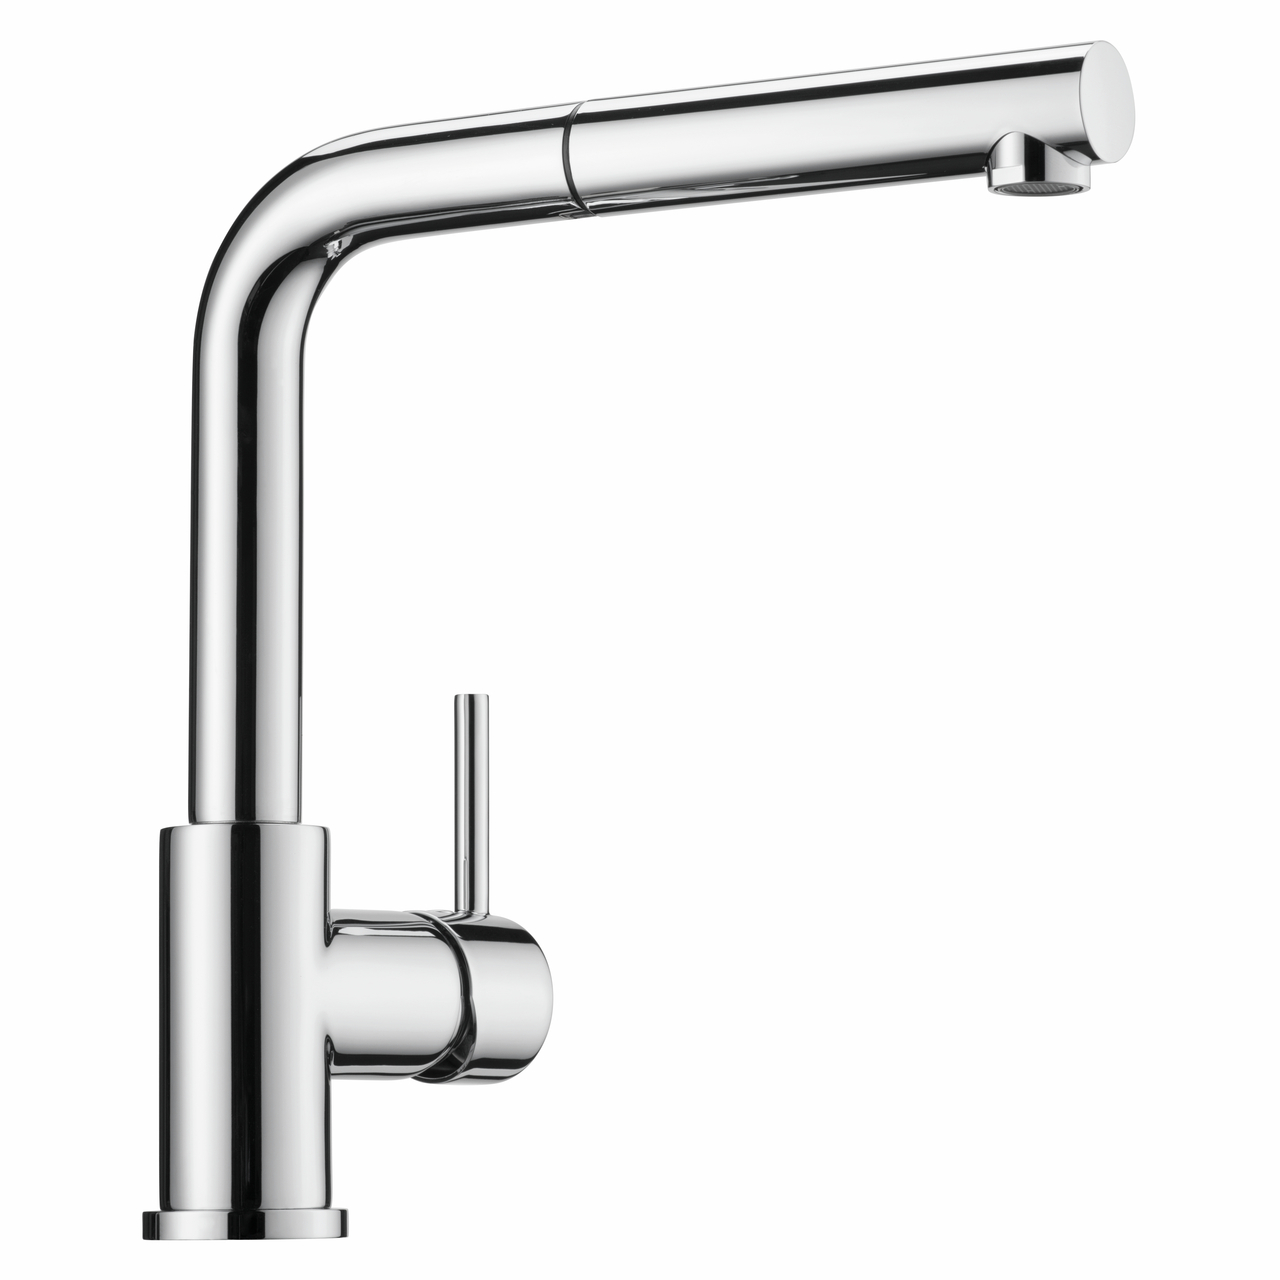 LINEA Arco 2, stainless steel finish, low pressure